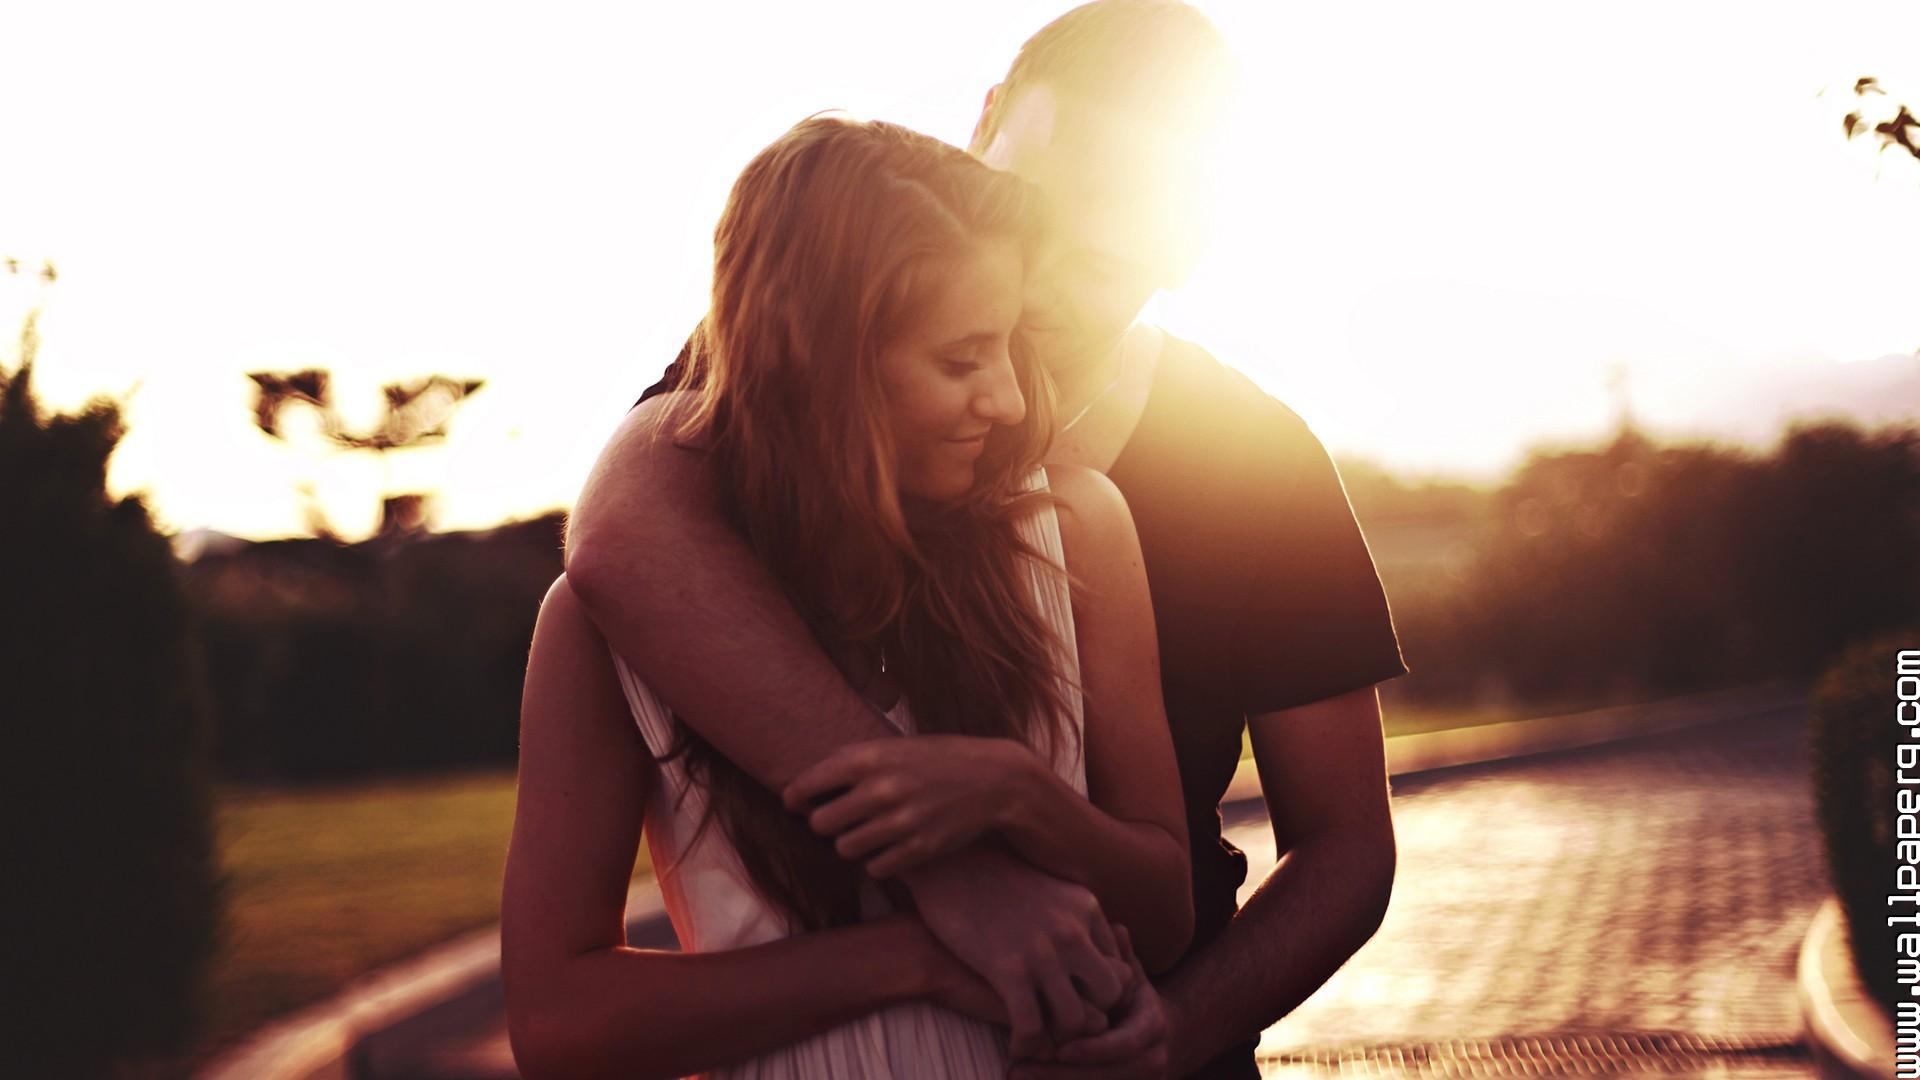 Download Sweet hug - Romantic couple wallpapers for your mobile cell phone